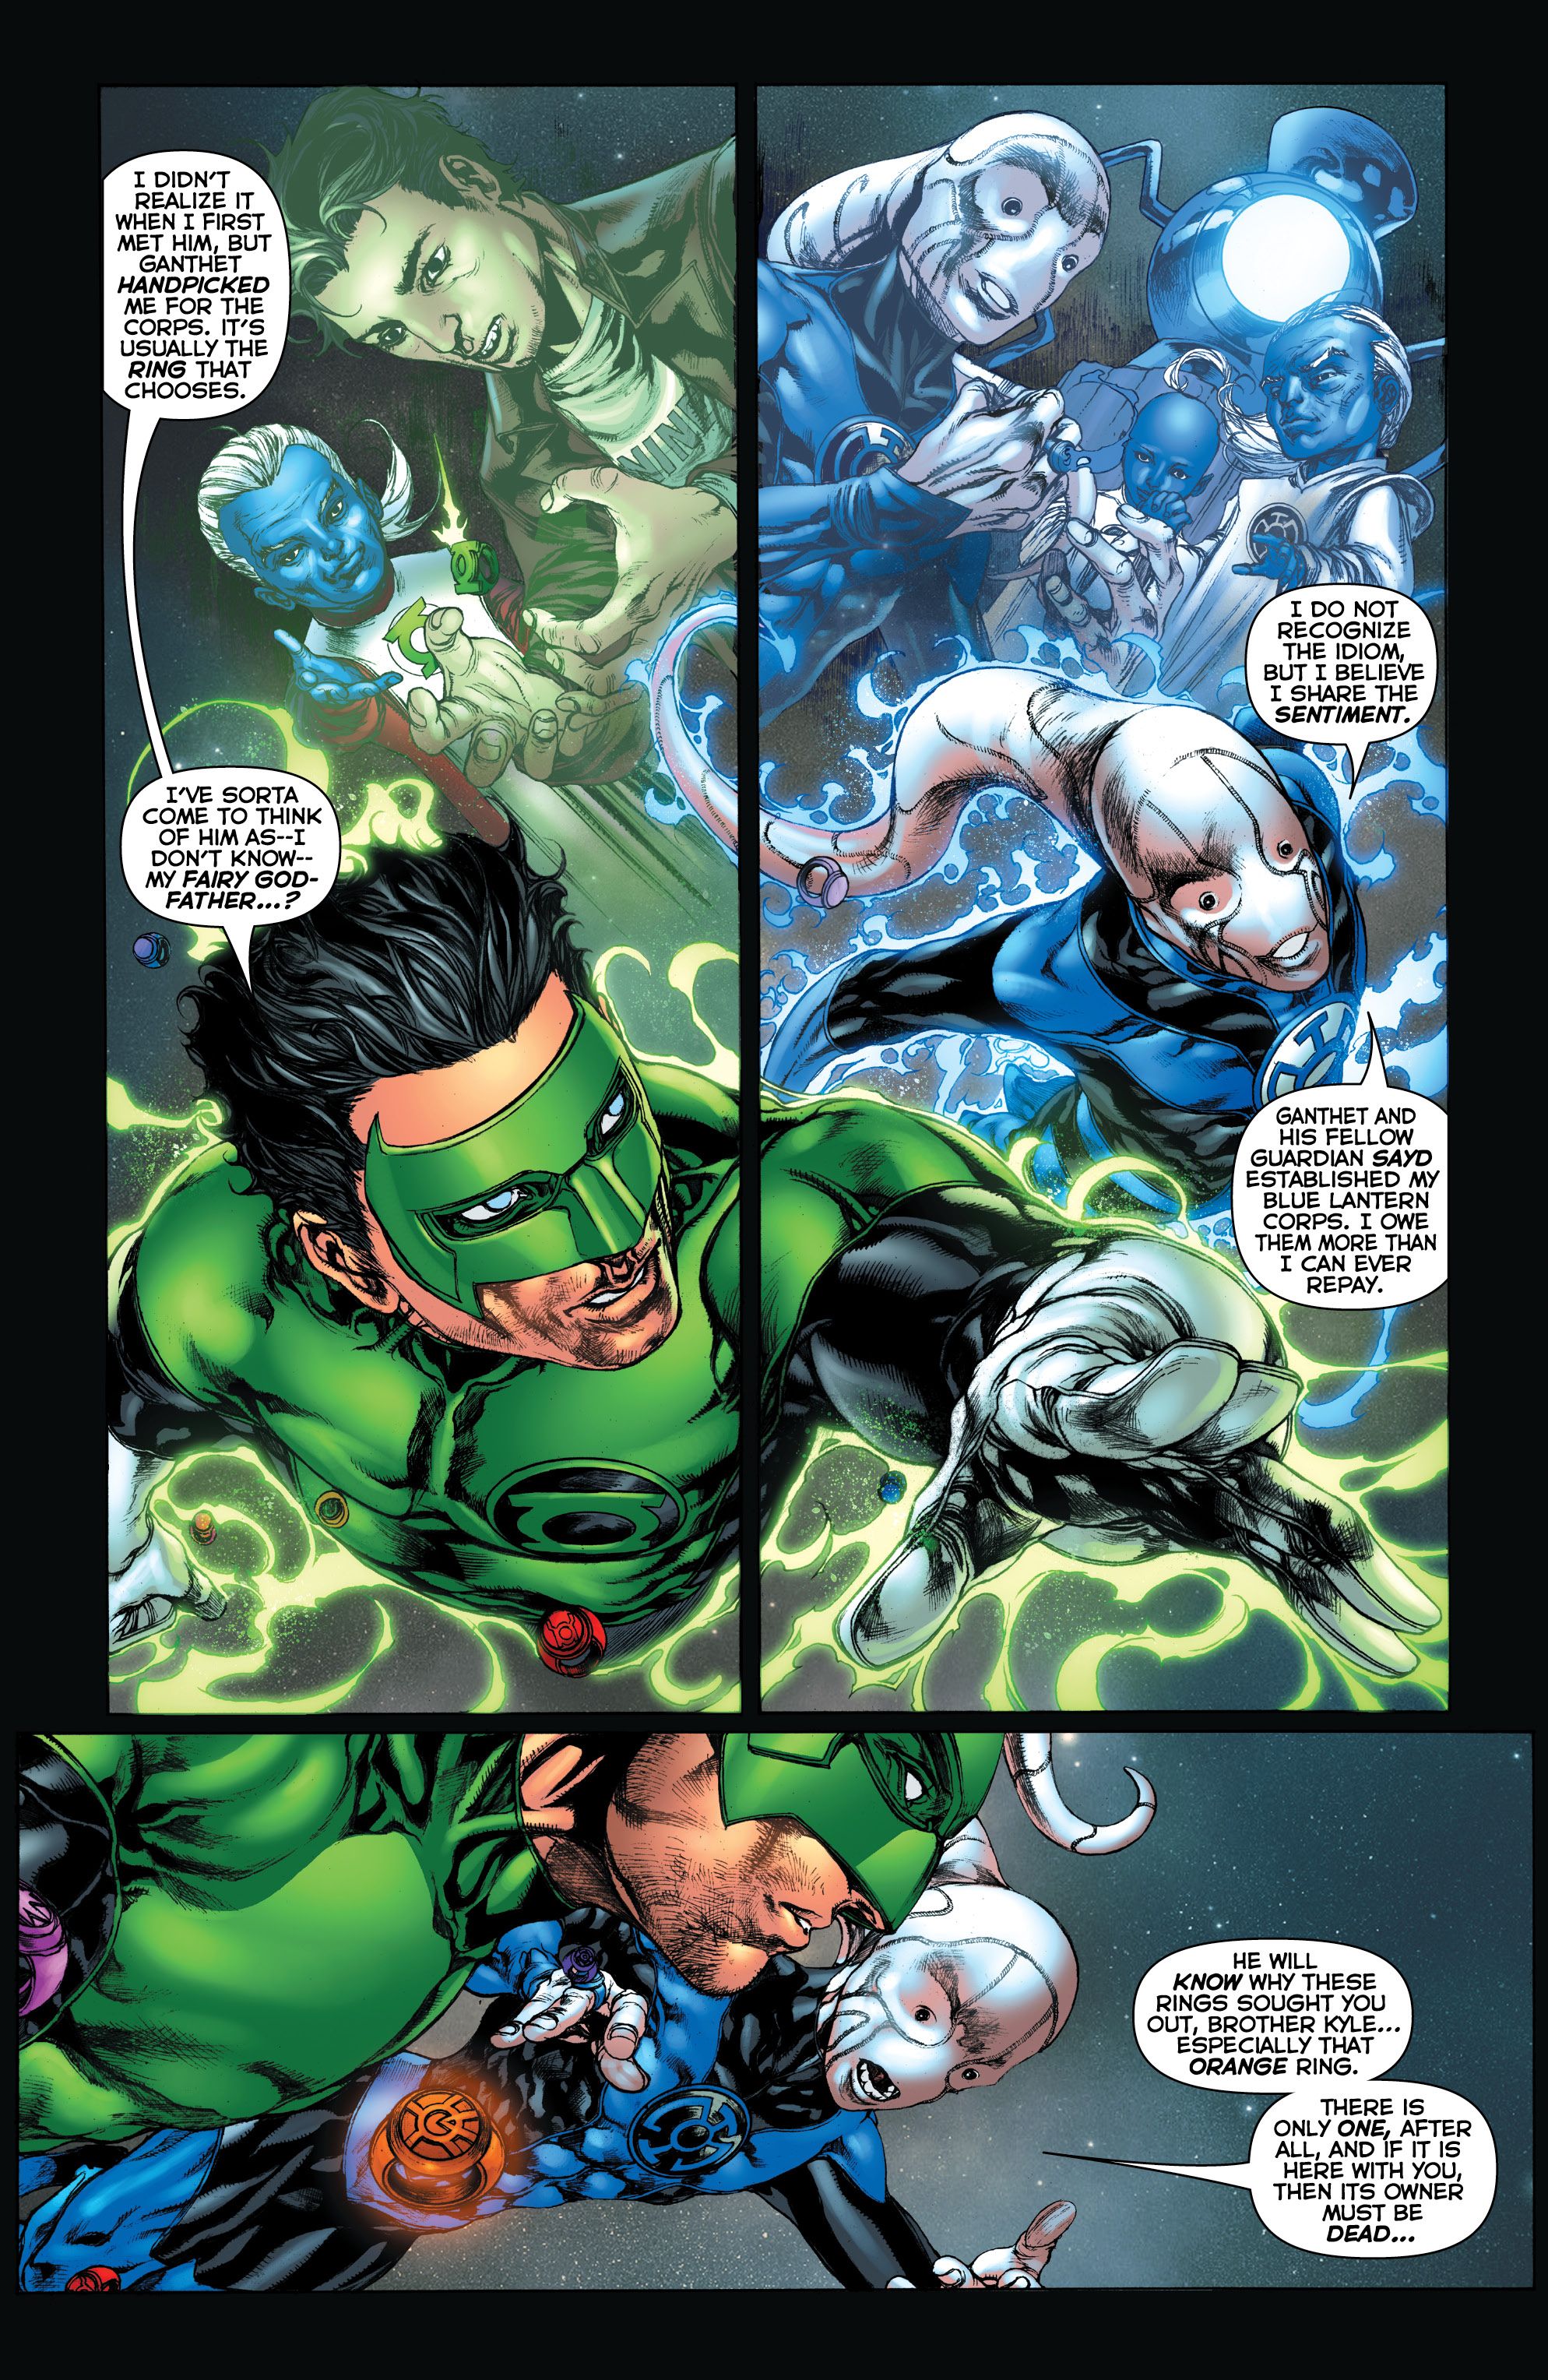 Kyle Rayner and Saint Walker Hunt Ganthet In This Preview of 'The New Guardians '